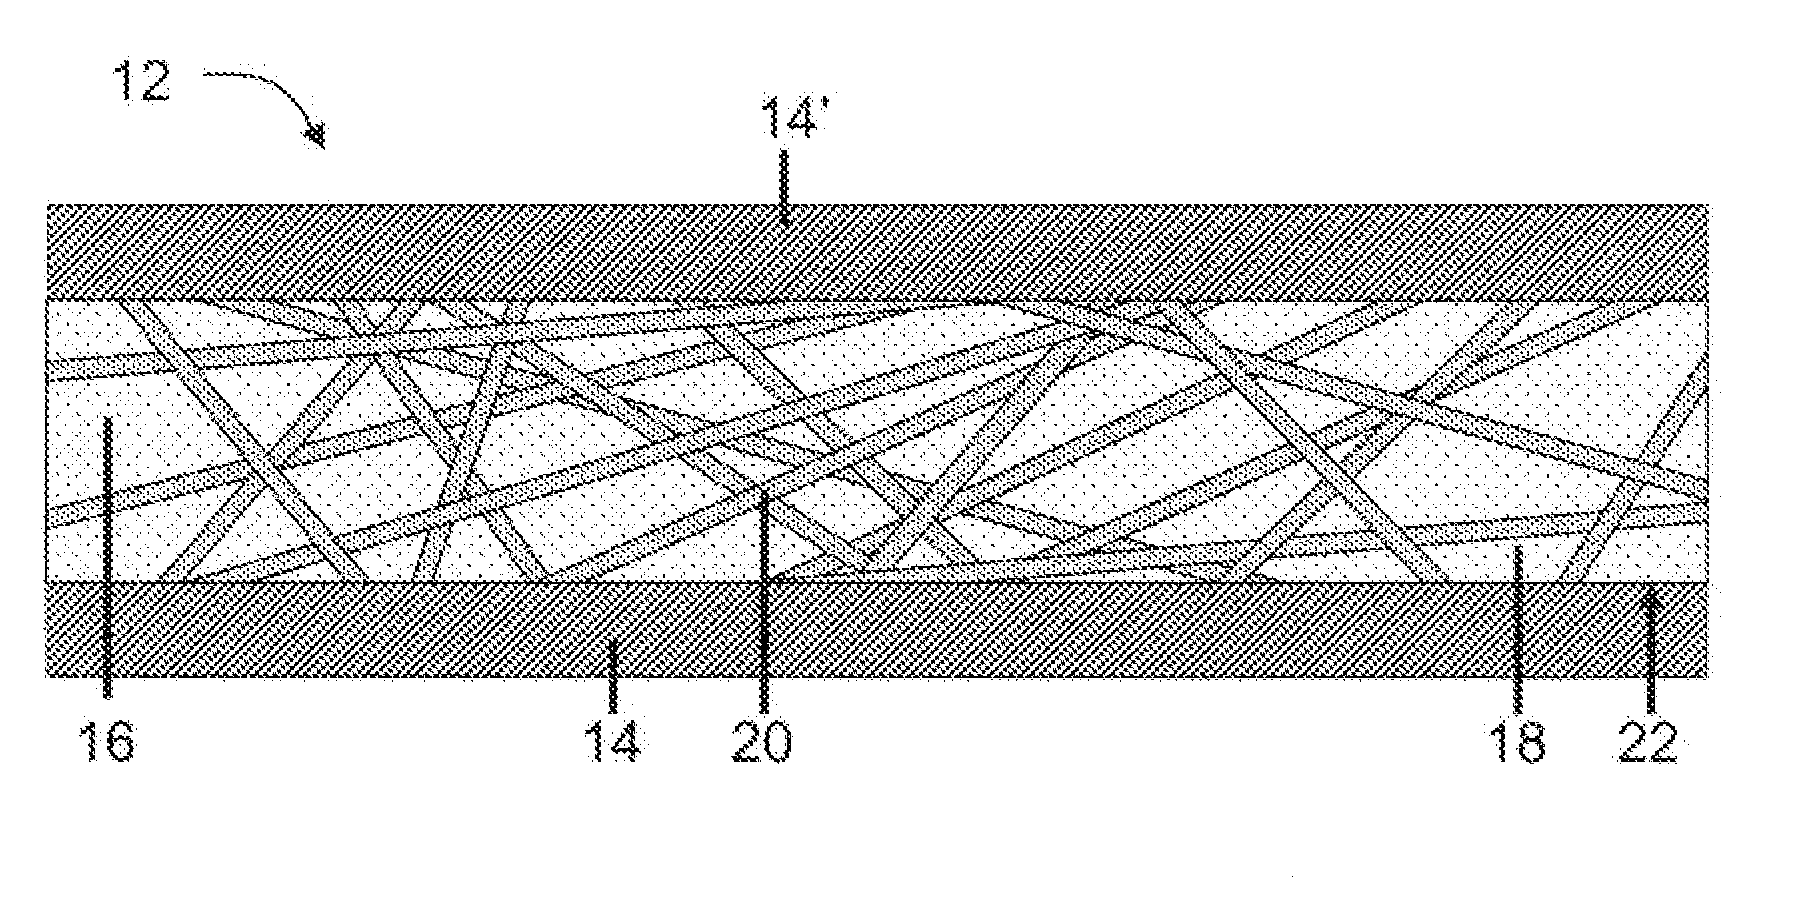 Formable light weight composite material systems and methods